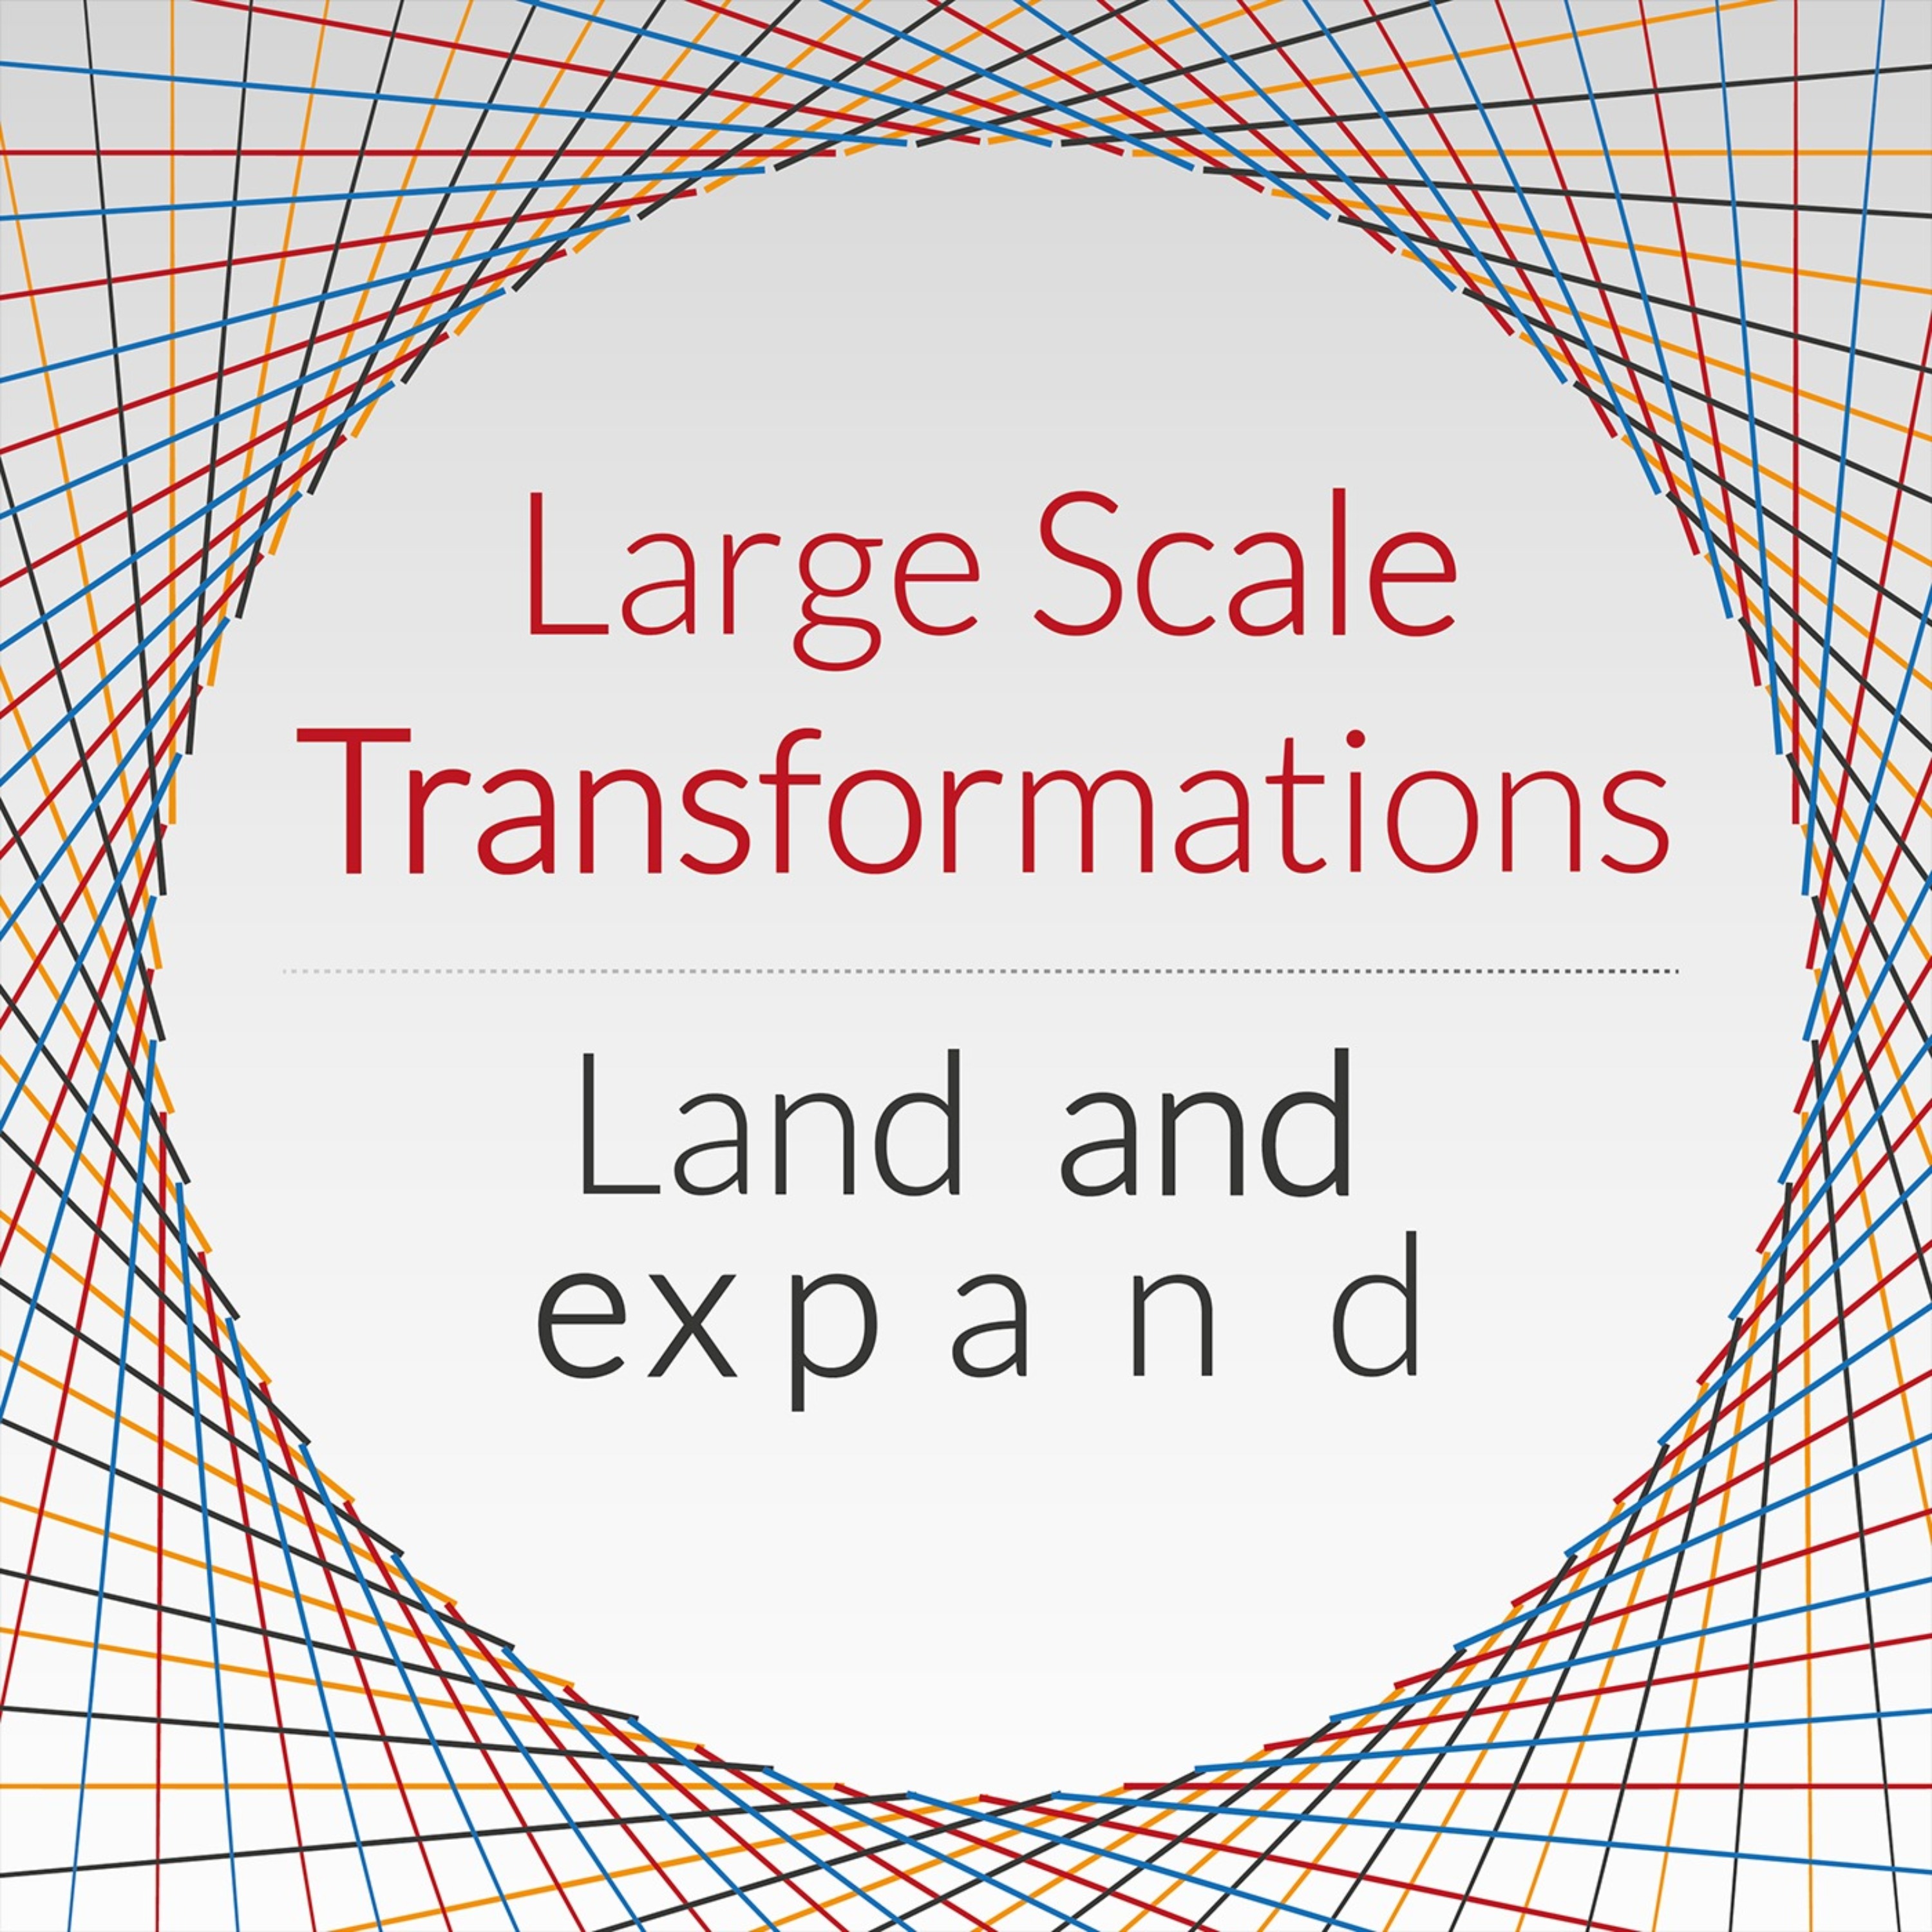 Large Scale Transformations